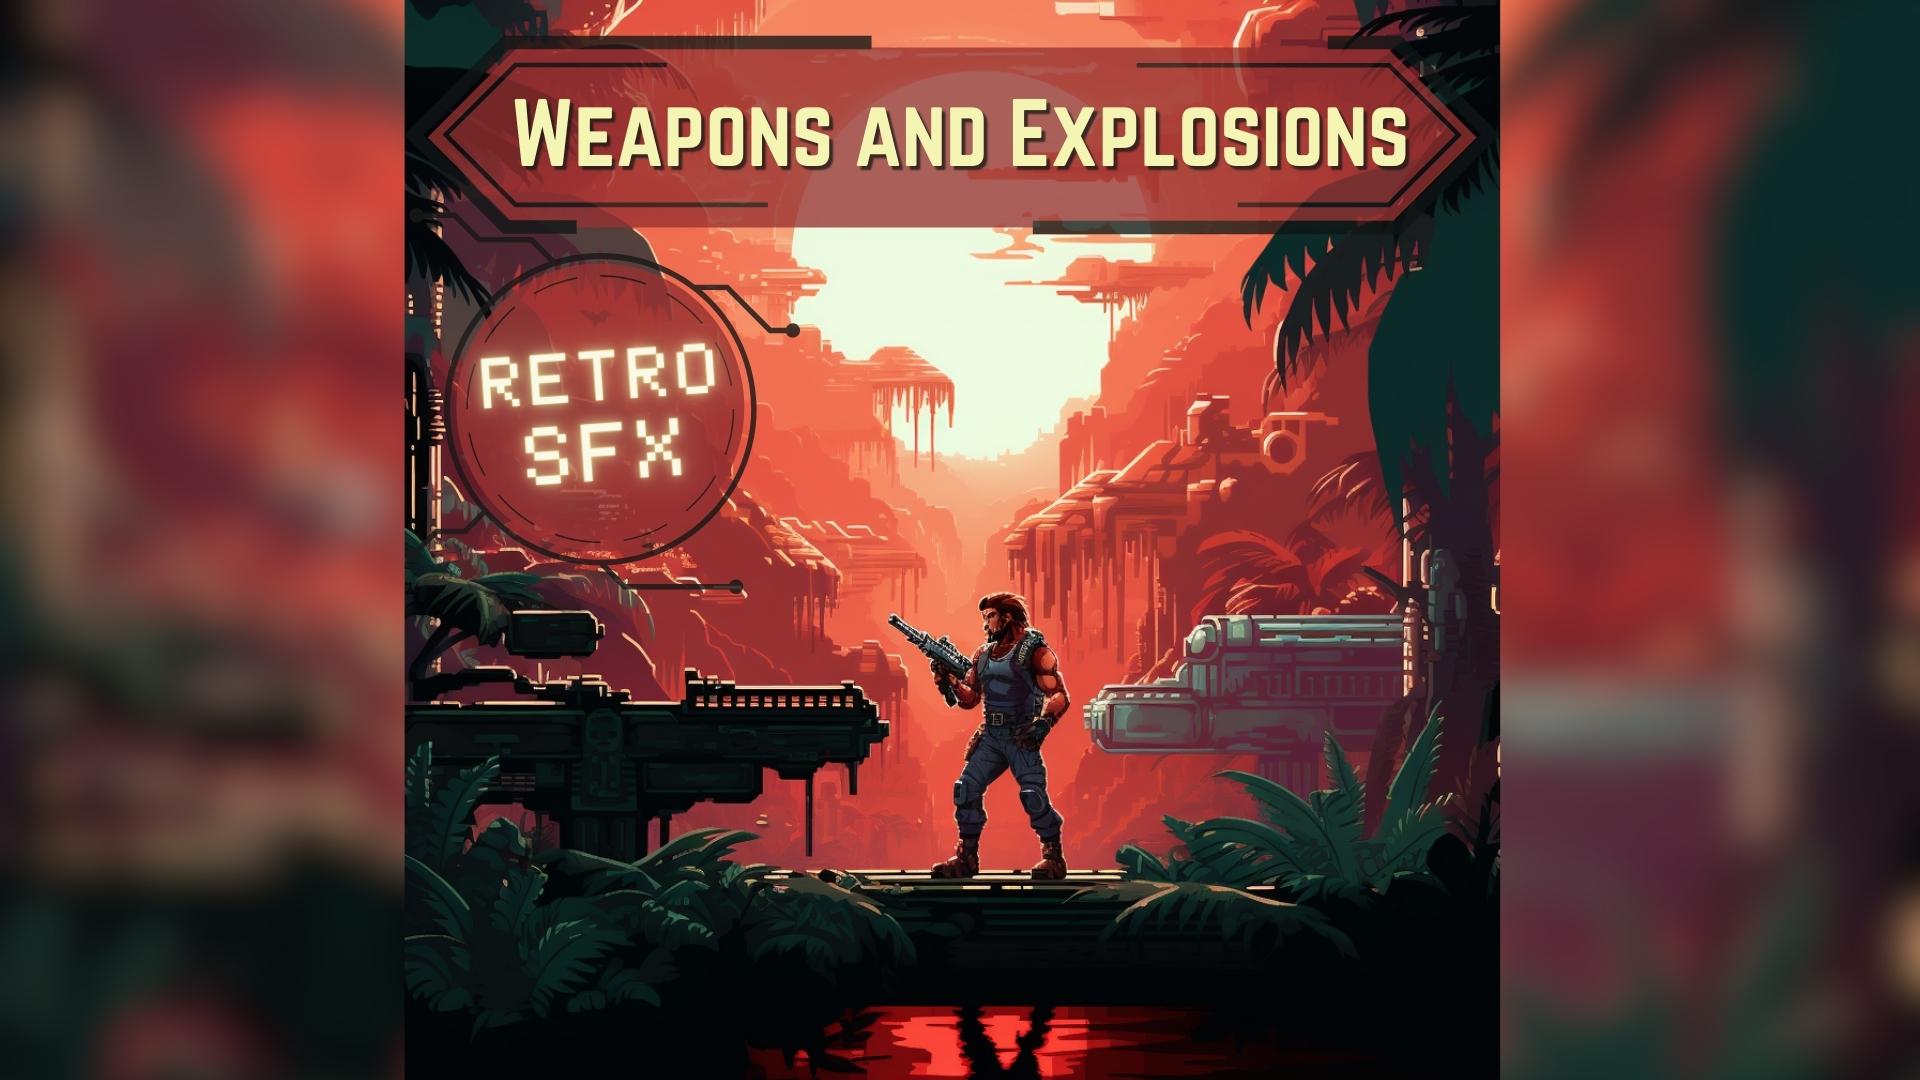 Retro Weapons and Explosions Sounds